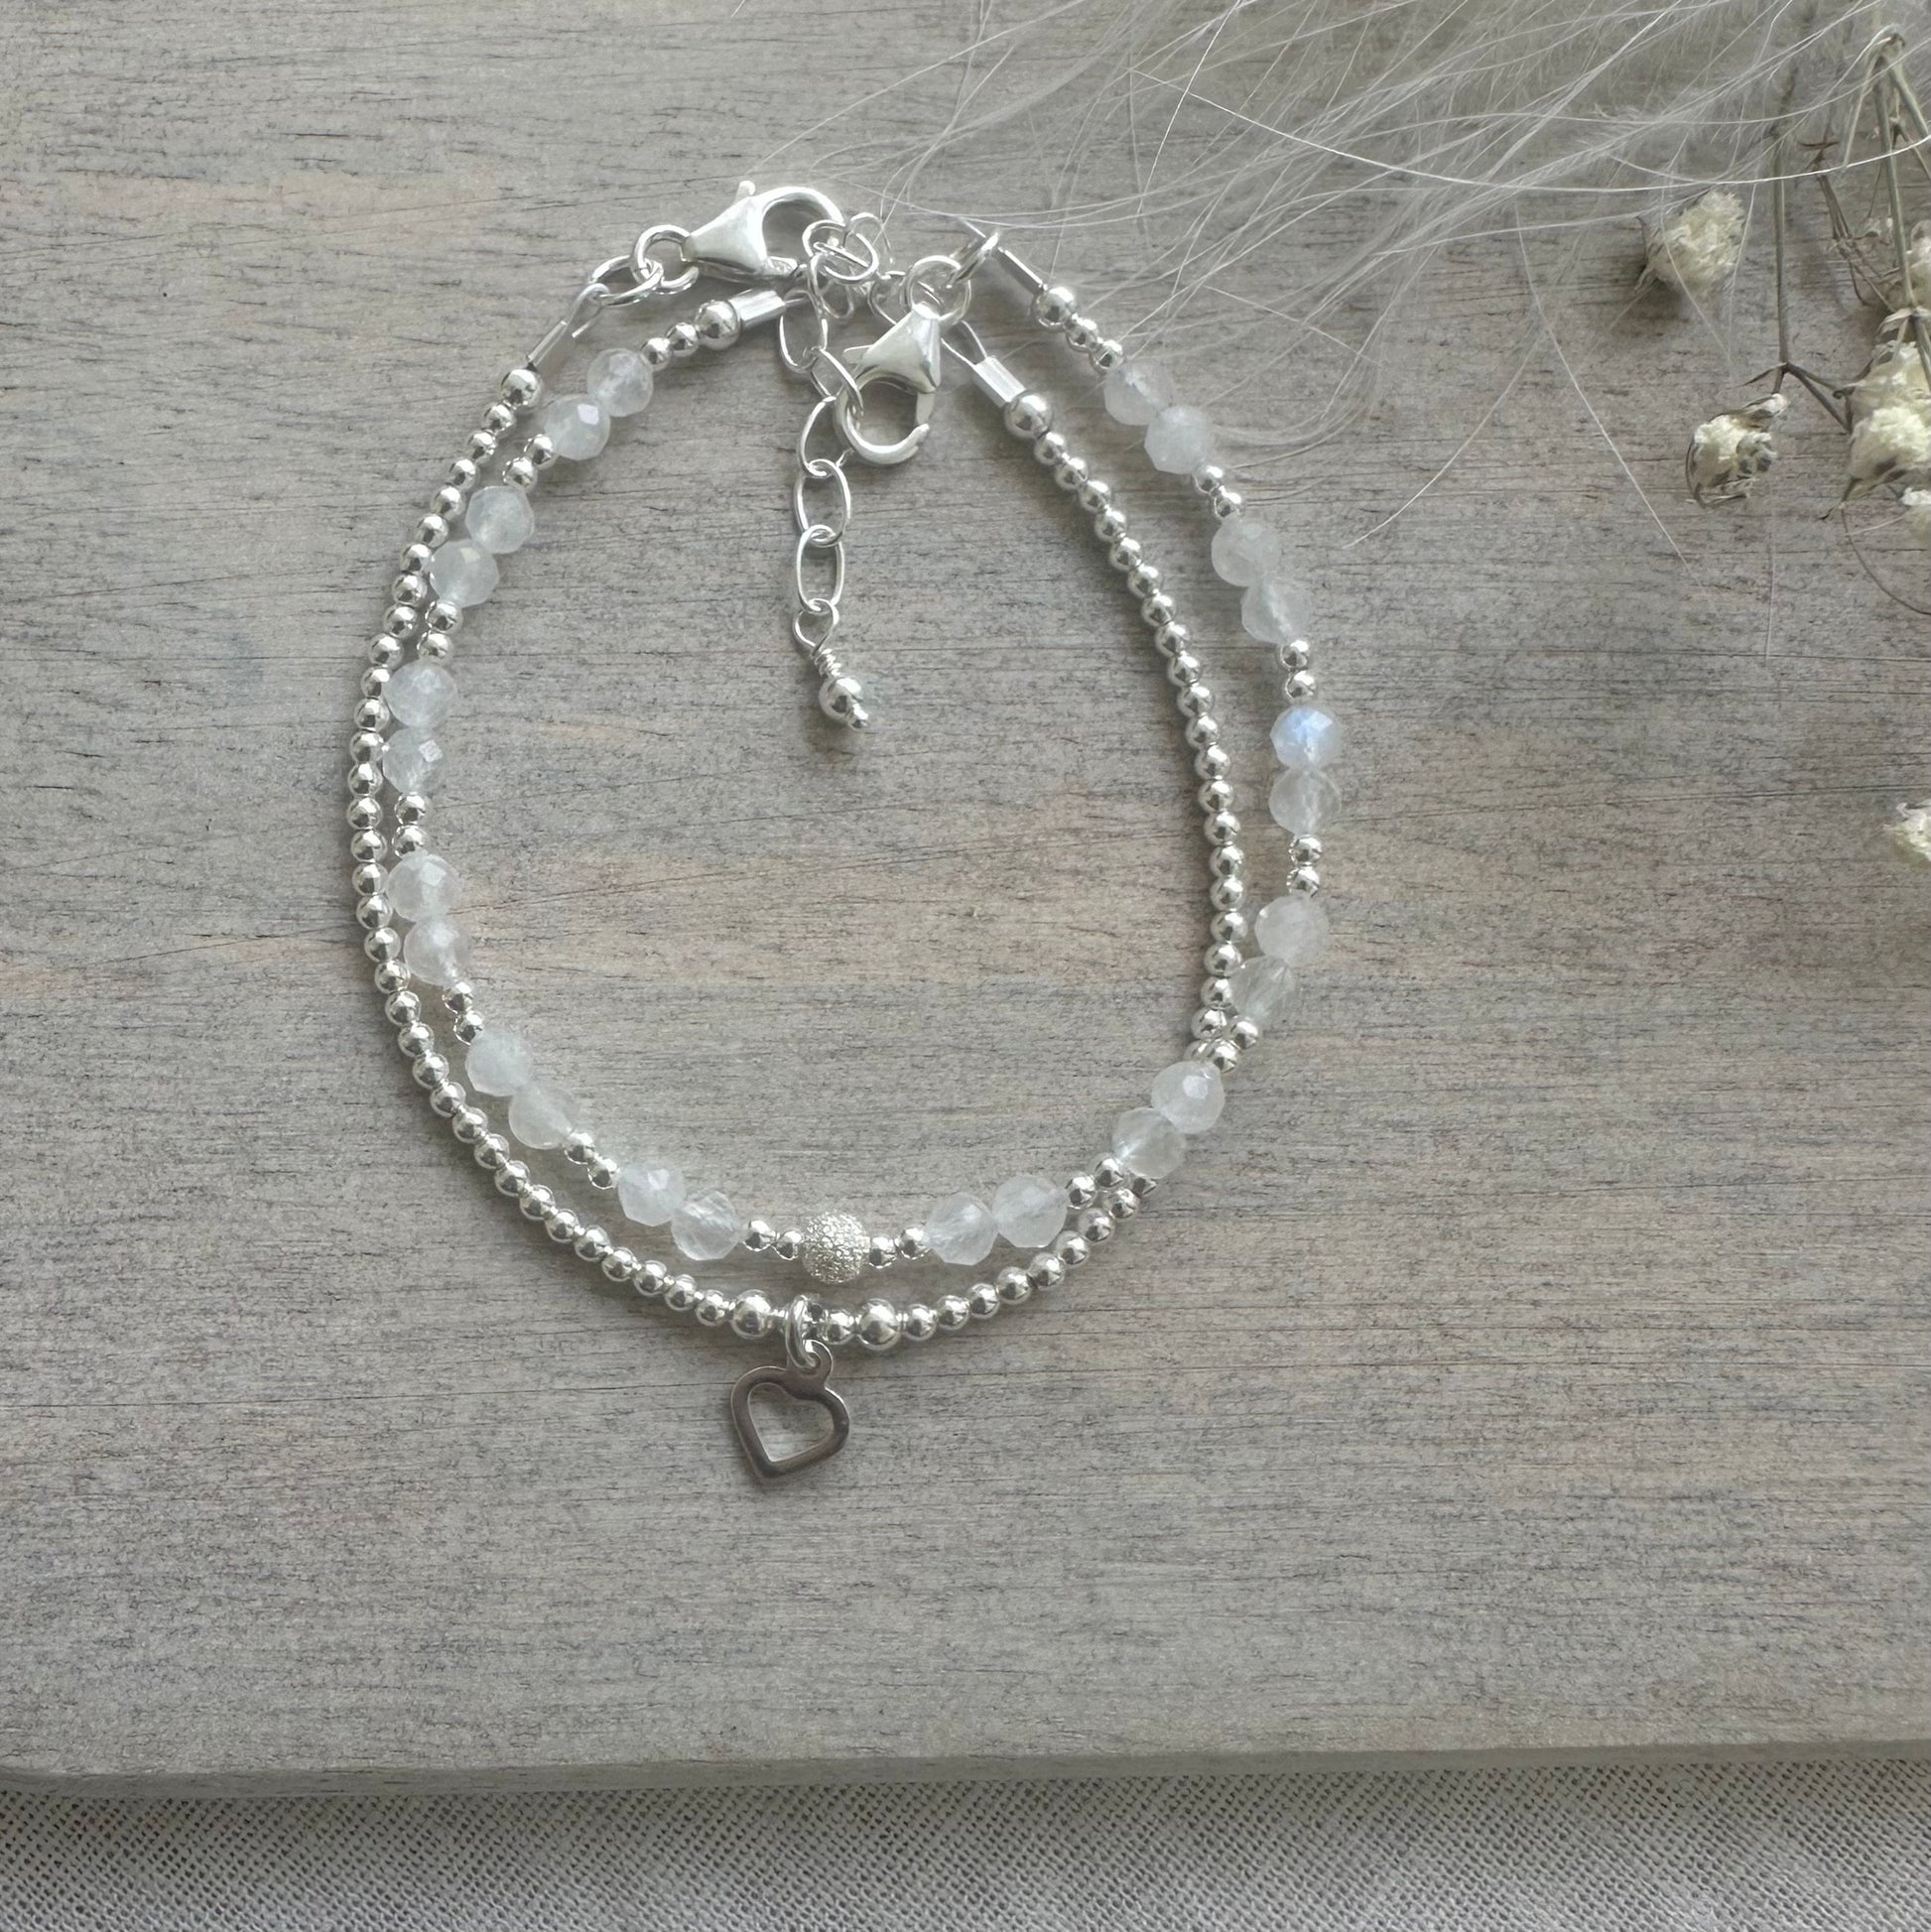 Moonstone Bracelet Set made with June Birthstone and Sterling Silver, June Birthday Gift for Women